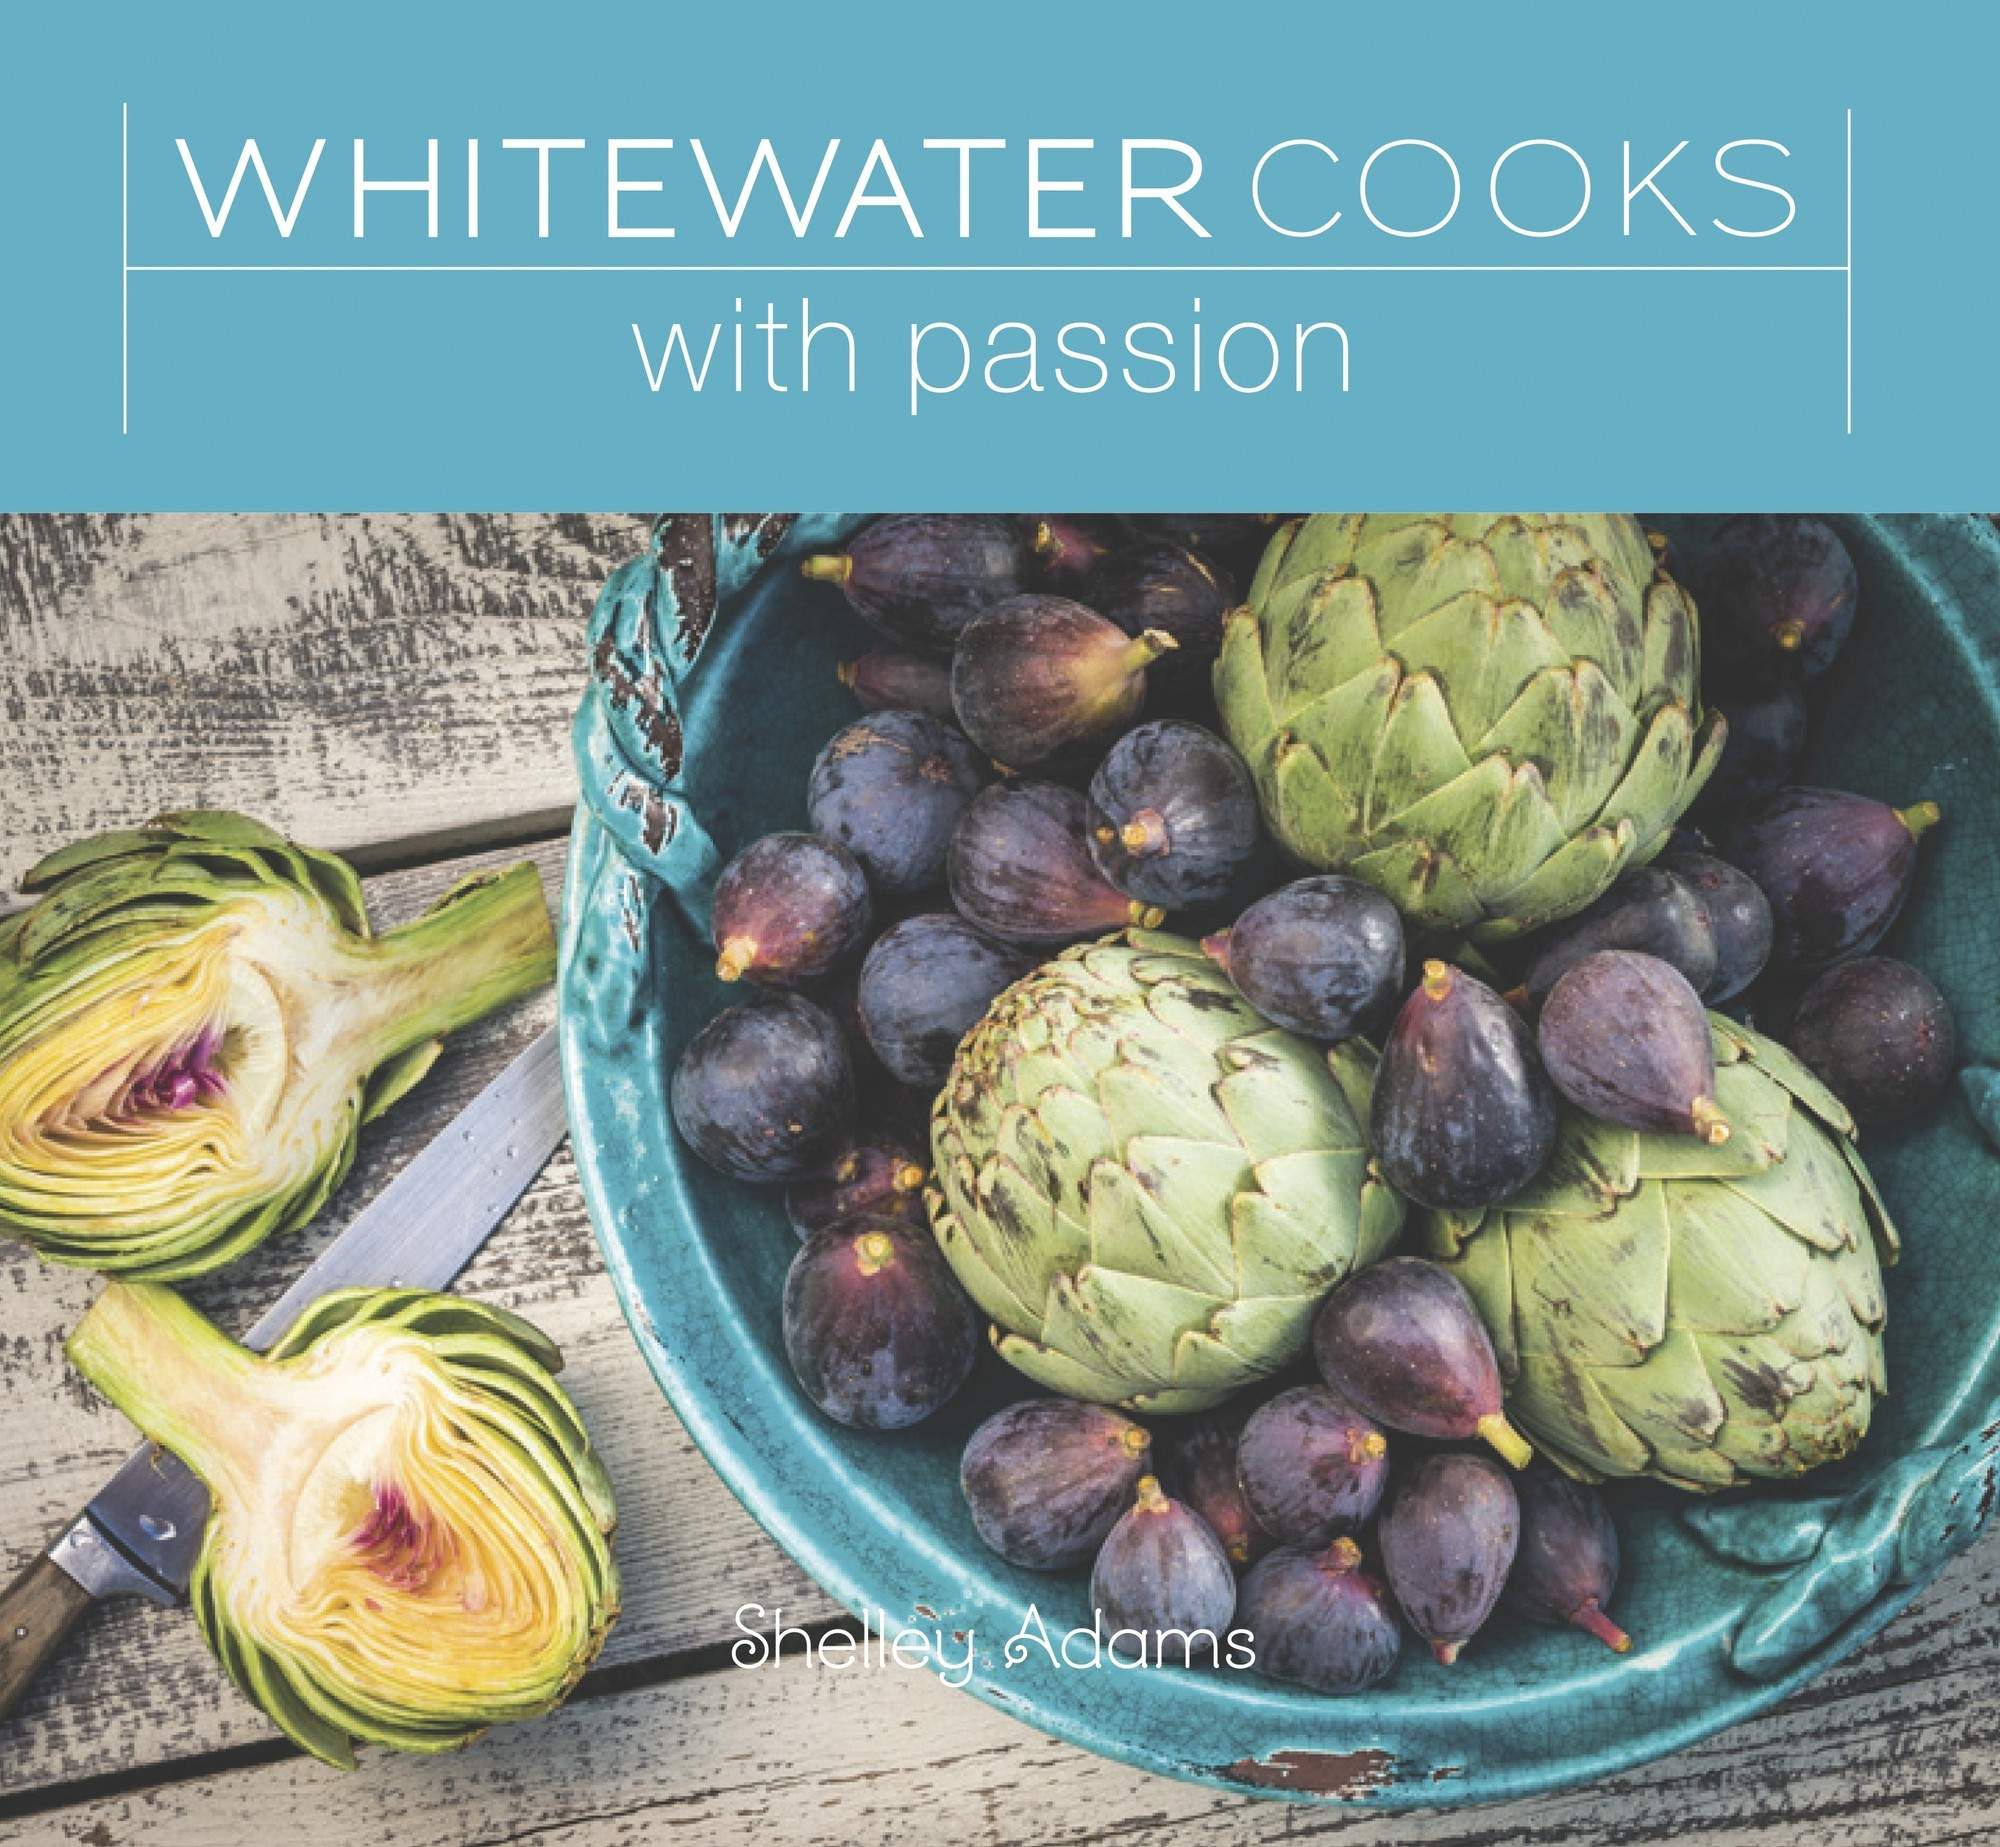 Whitewater Cooks cookbook